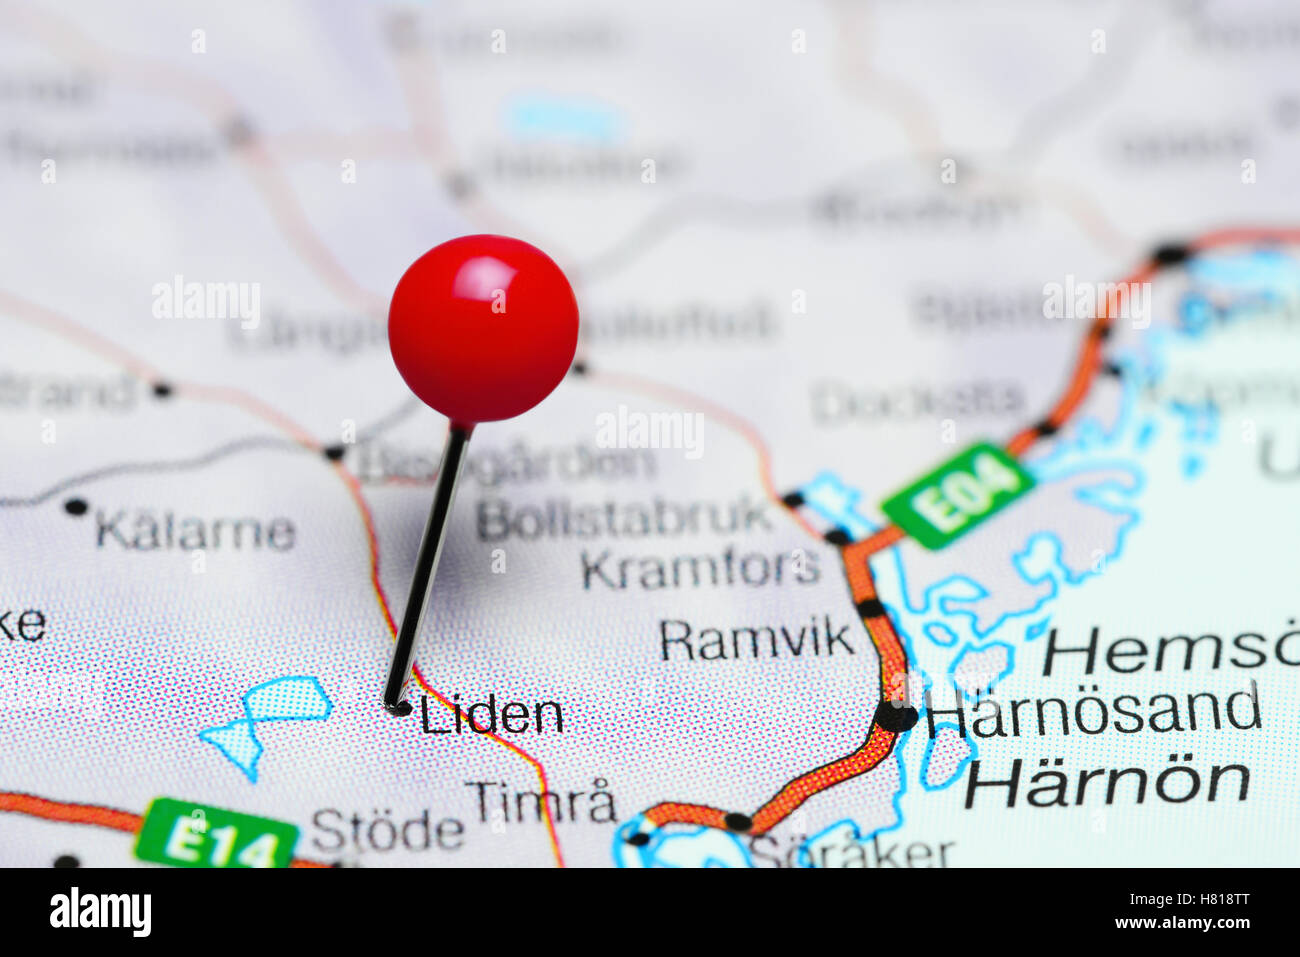 Liden pinned on a map of Sweden Stock Photo